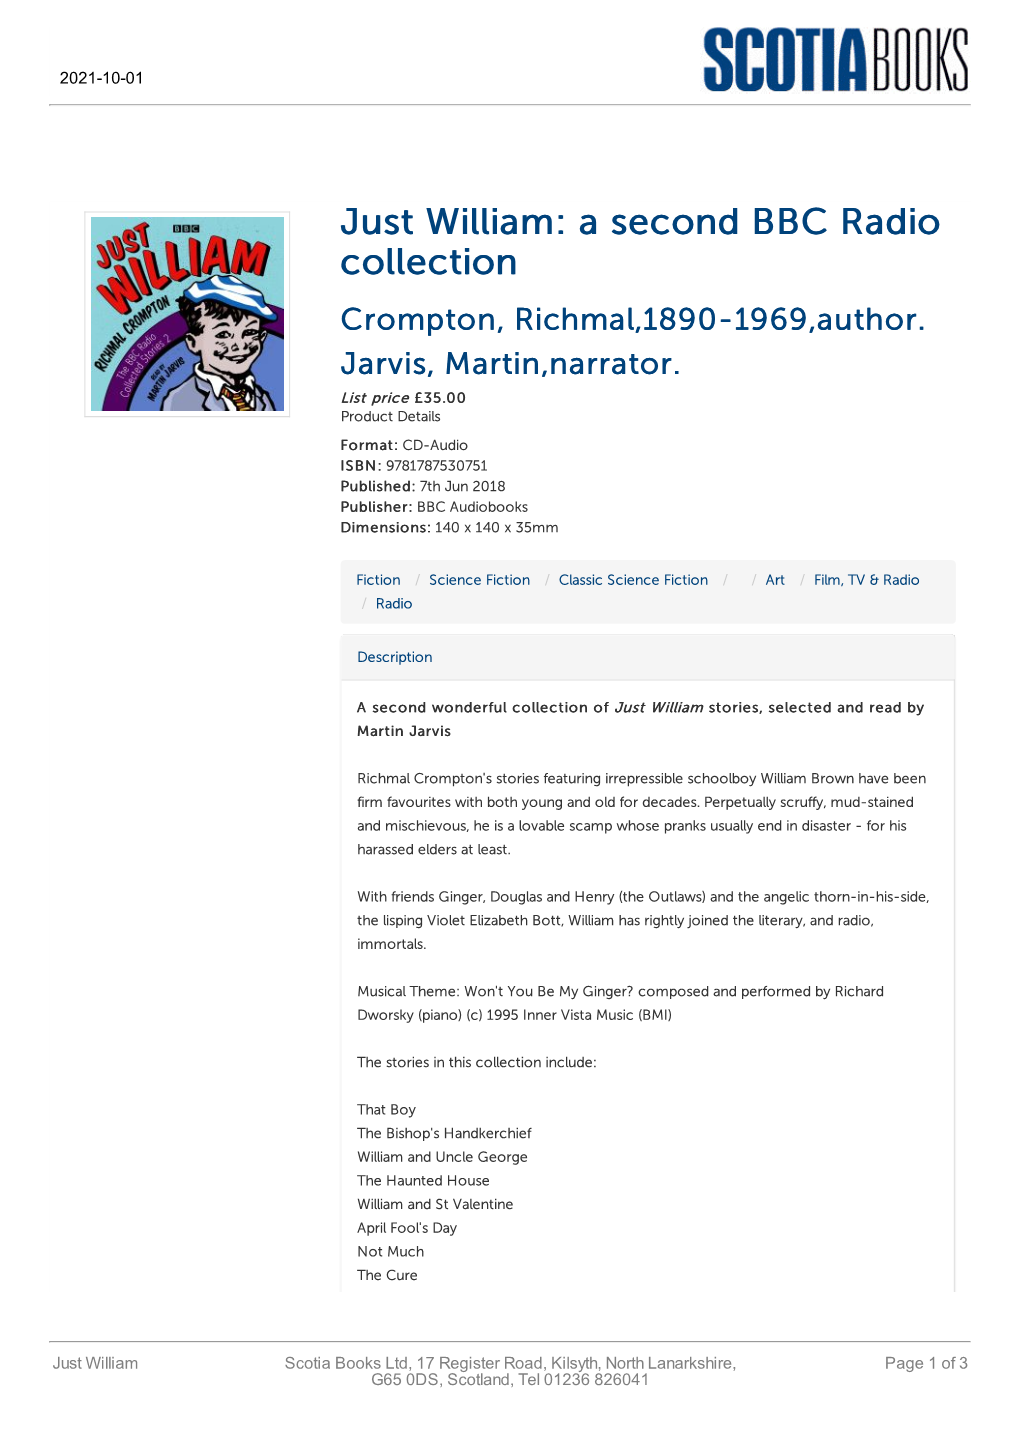 Just William: a Second BBC Radio Collection Crompton, Richmal,1890-1969,Author